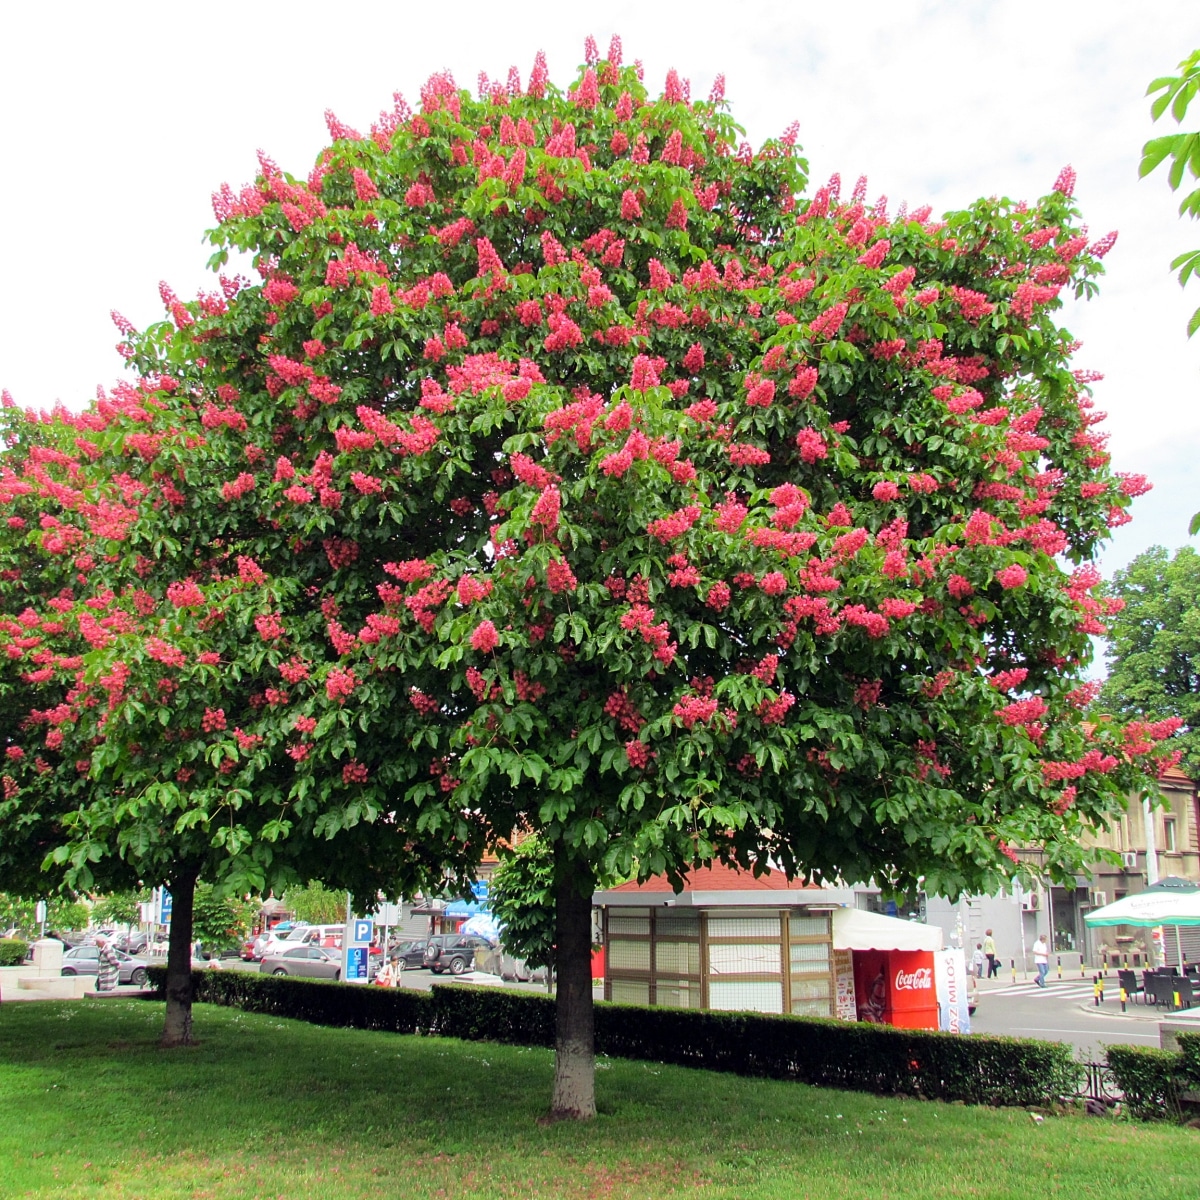 The pink-flowered chestnut tree is a shade tree